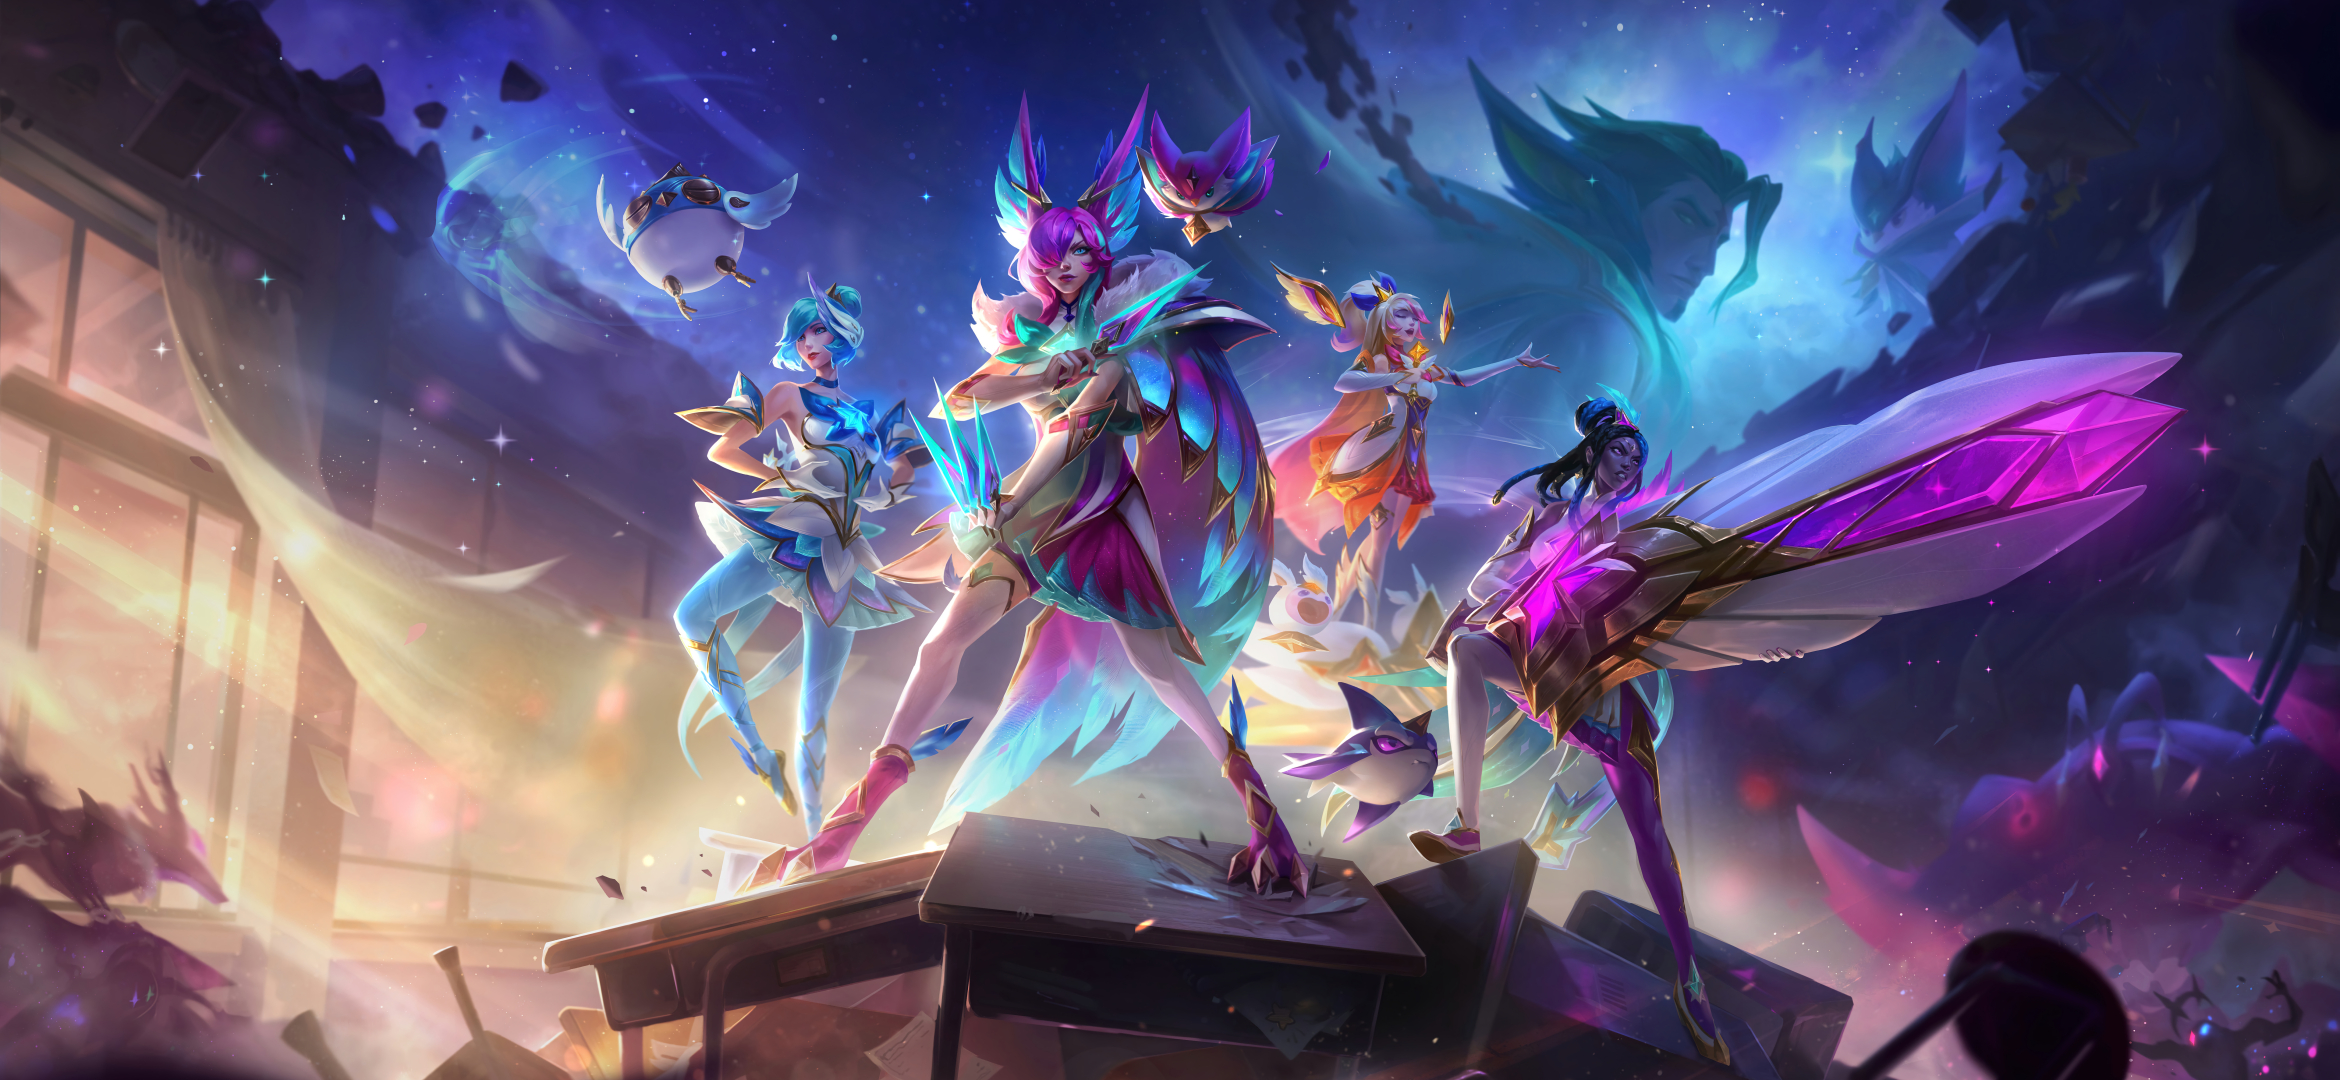 2340x1080 League Of Legends 8k Gaming Poster 2340x1080 Resolution ...